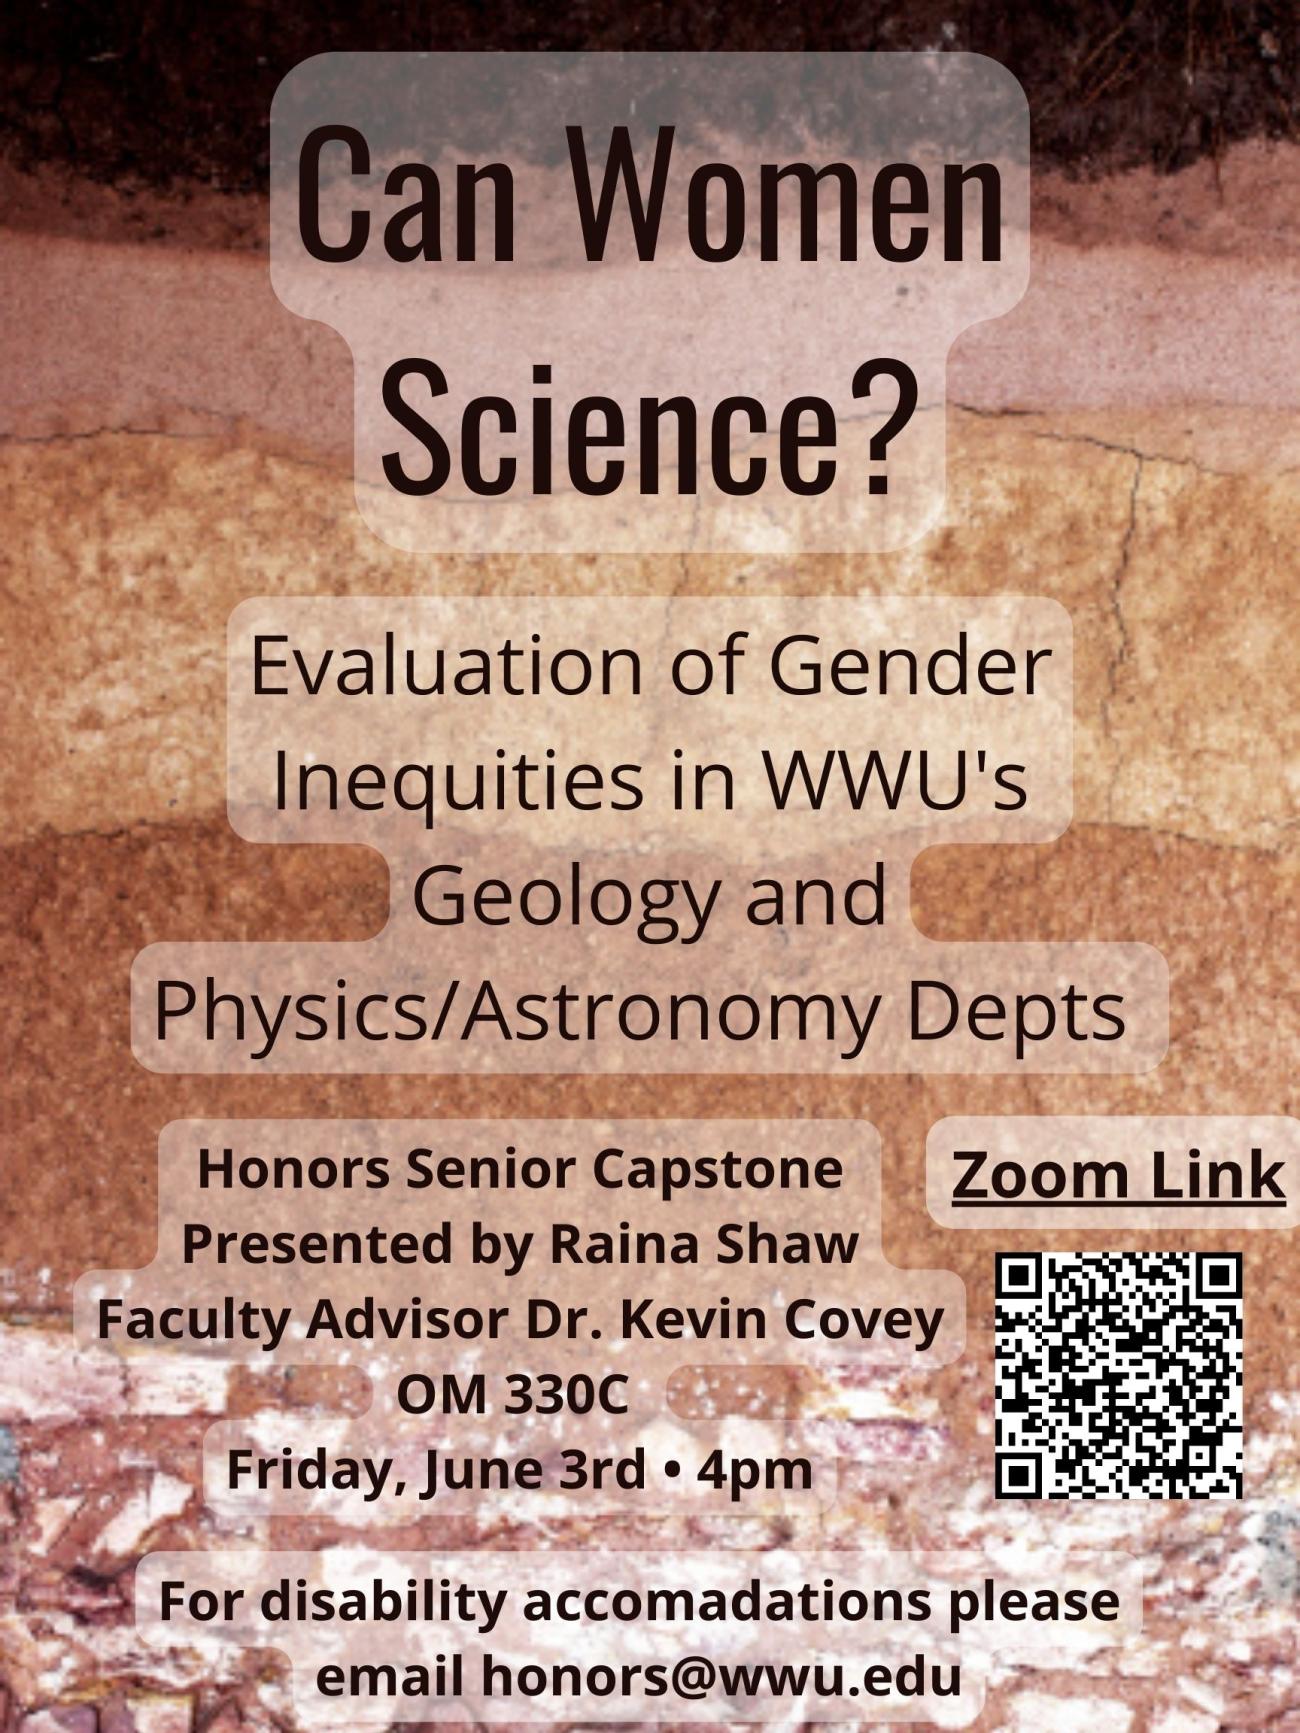 Background image of brown sediment layers. Large text reads "Can Women Science? Evaluation of Gender Inequalities in WWU's Geology and Physics/Astronomy departments. Honors senior capstone, presented by Raina Shaw, faculty advisor Dr. Kevin Covey, OM 330C, Friday June 3rd, 4pm. For disability accommodations please email honors@wwu.edu". To the right is a QR code entitled "Zoom link!".